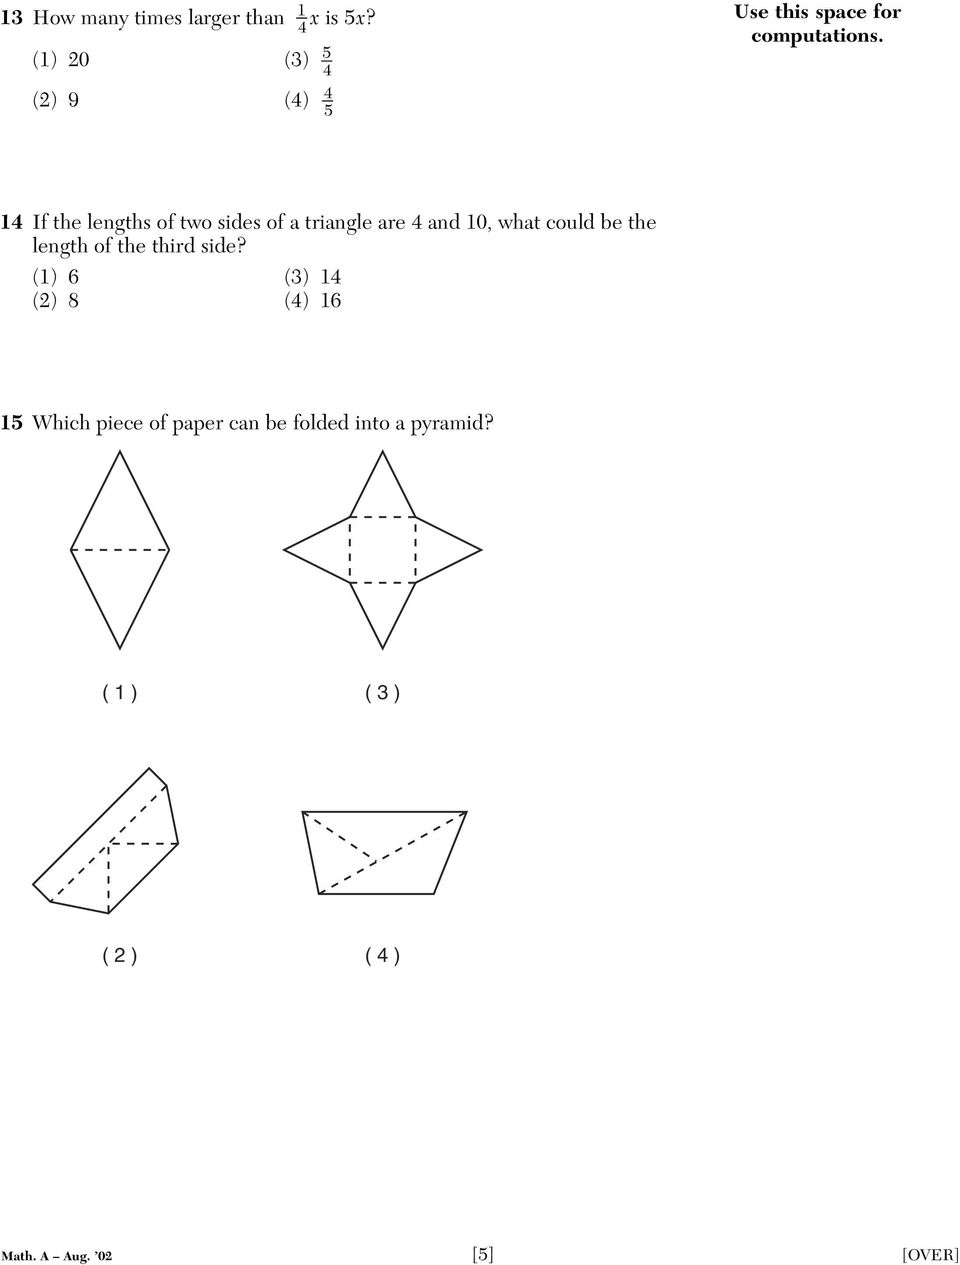 14 If the lengths of two sides of a triangle are 4 and 10, what could be the length